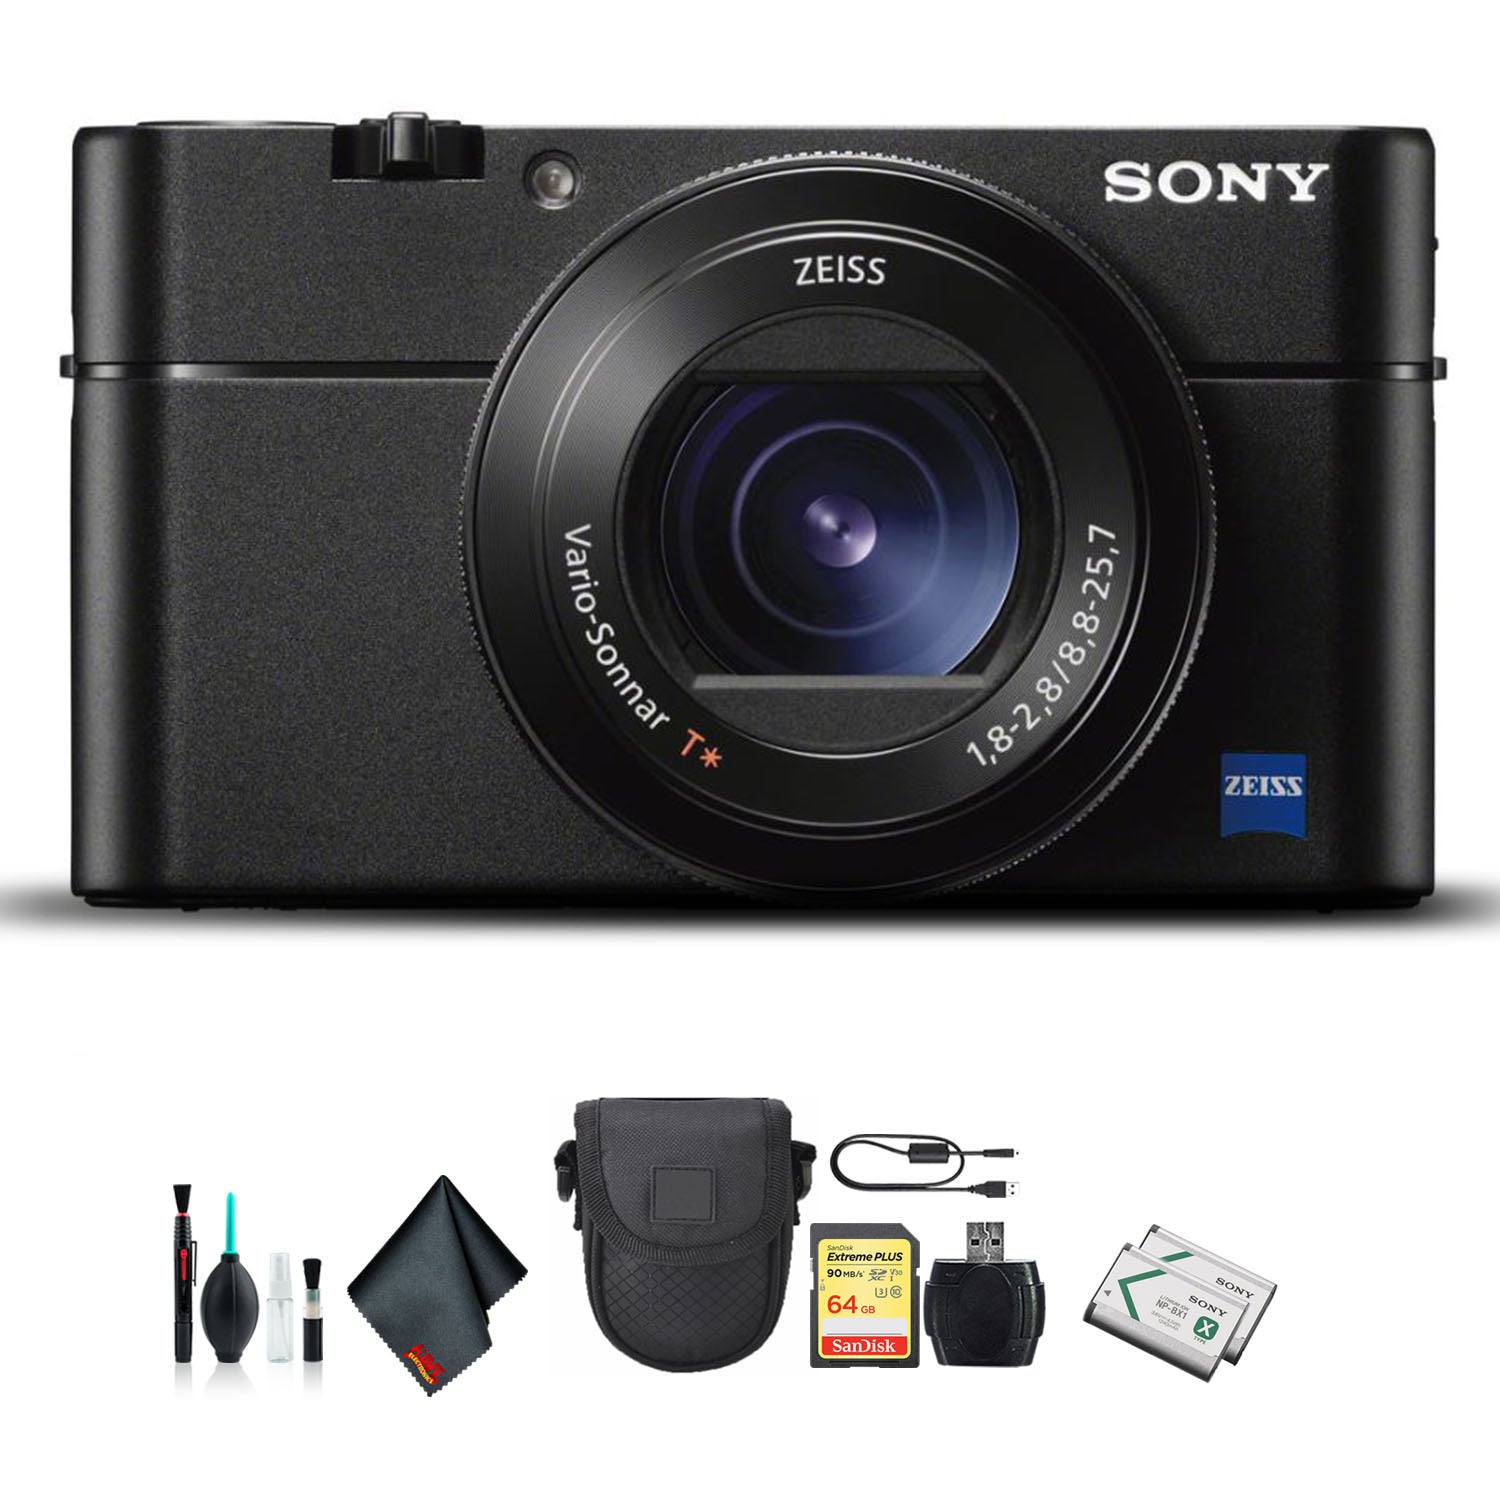 Sony Cyber-shot DSC-RX100 VA Camera DSC-RX100M5A/B With Soft Bag, Additional Battery, 64GB Memory Card, Card Reader , Plus Essential Accessories